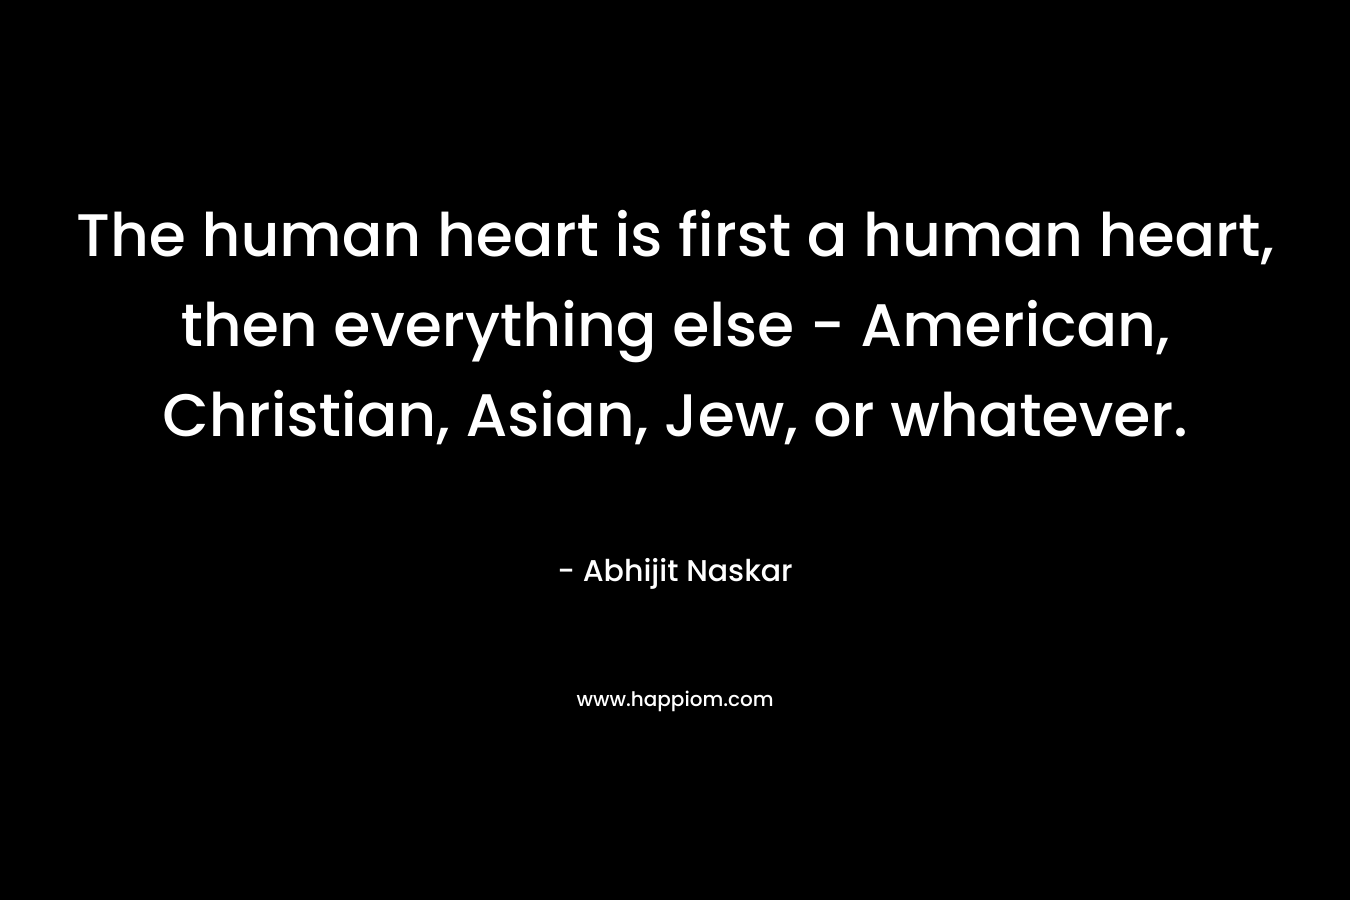 The human heart is first a human heart, then everything else - American, Christian, Asian, Jew, or whatever.